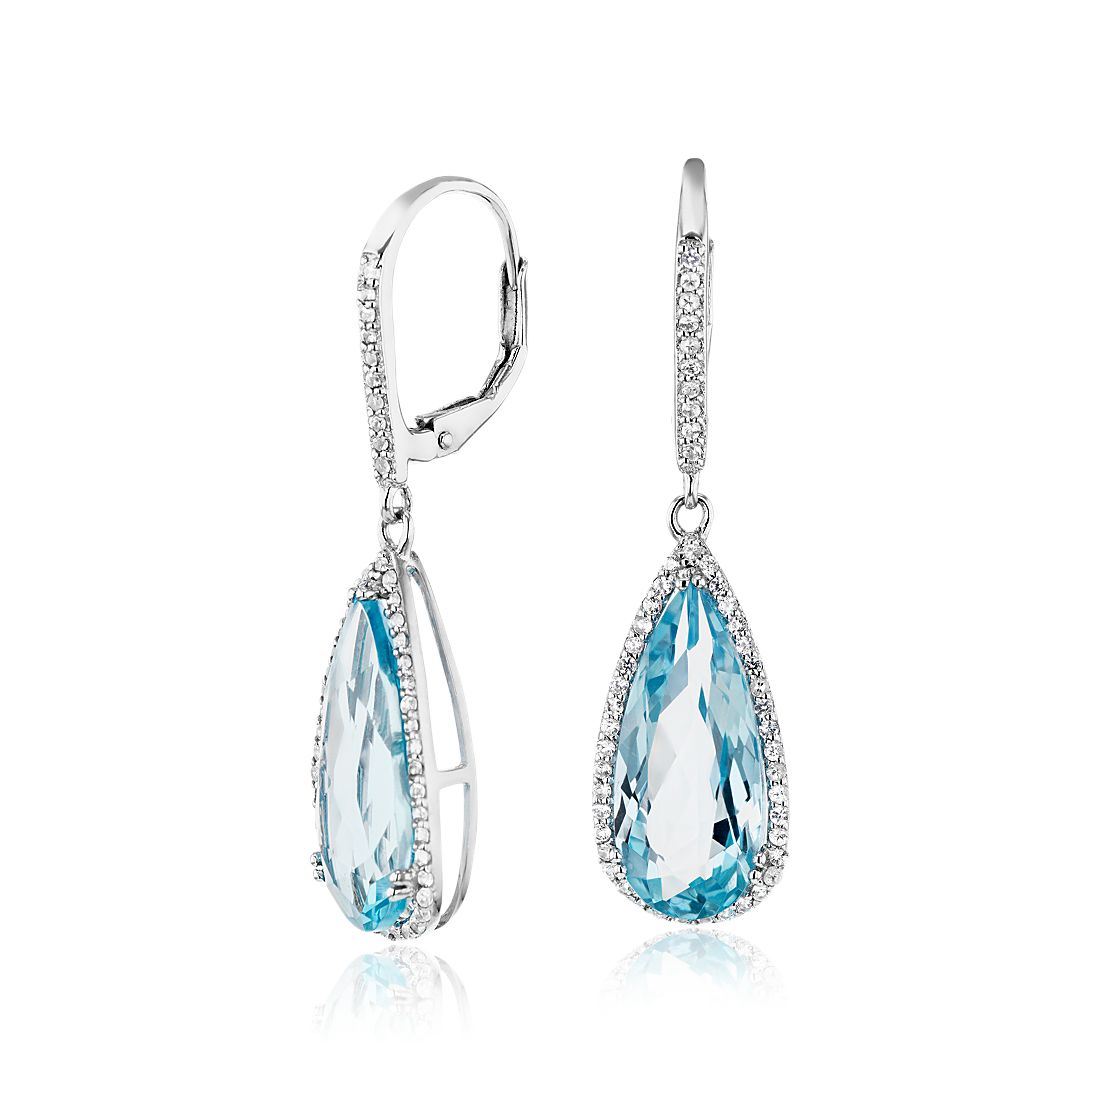 Pear-Shaped Blue Topaz Drop Earrings with White Topaz Halo in Sterling Silver (18x8mm)